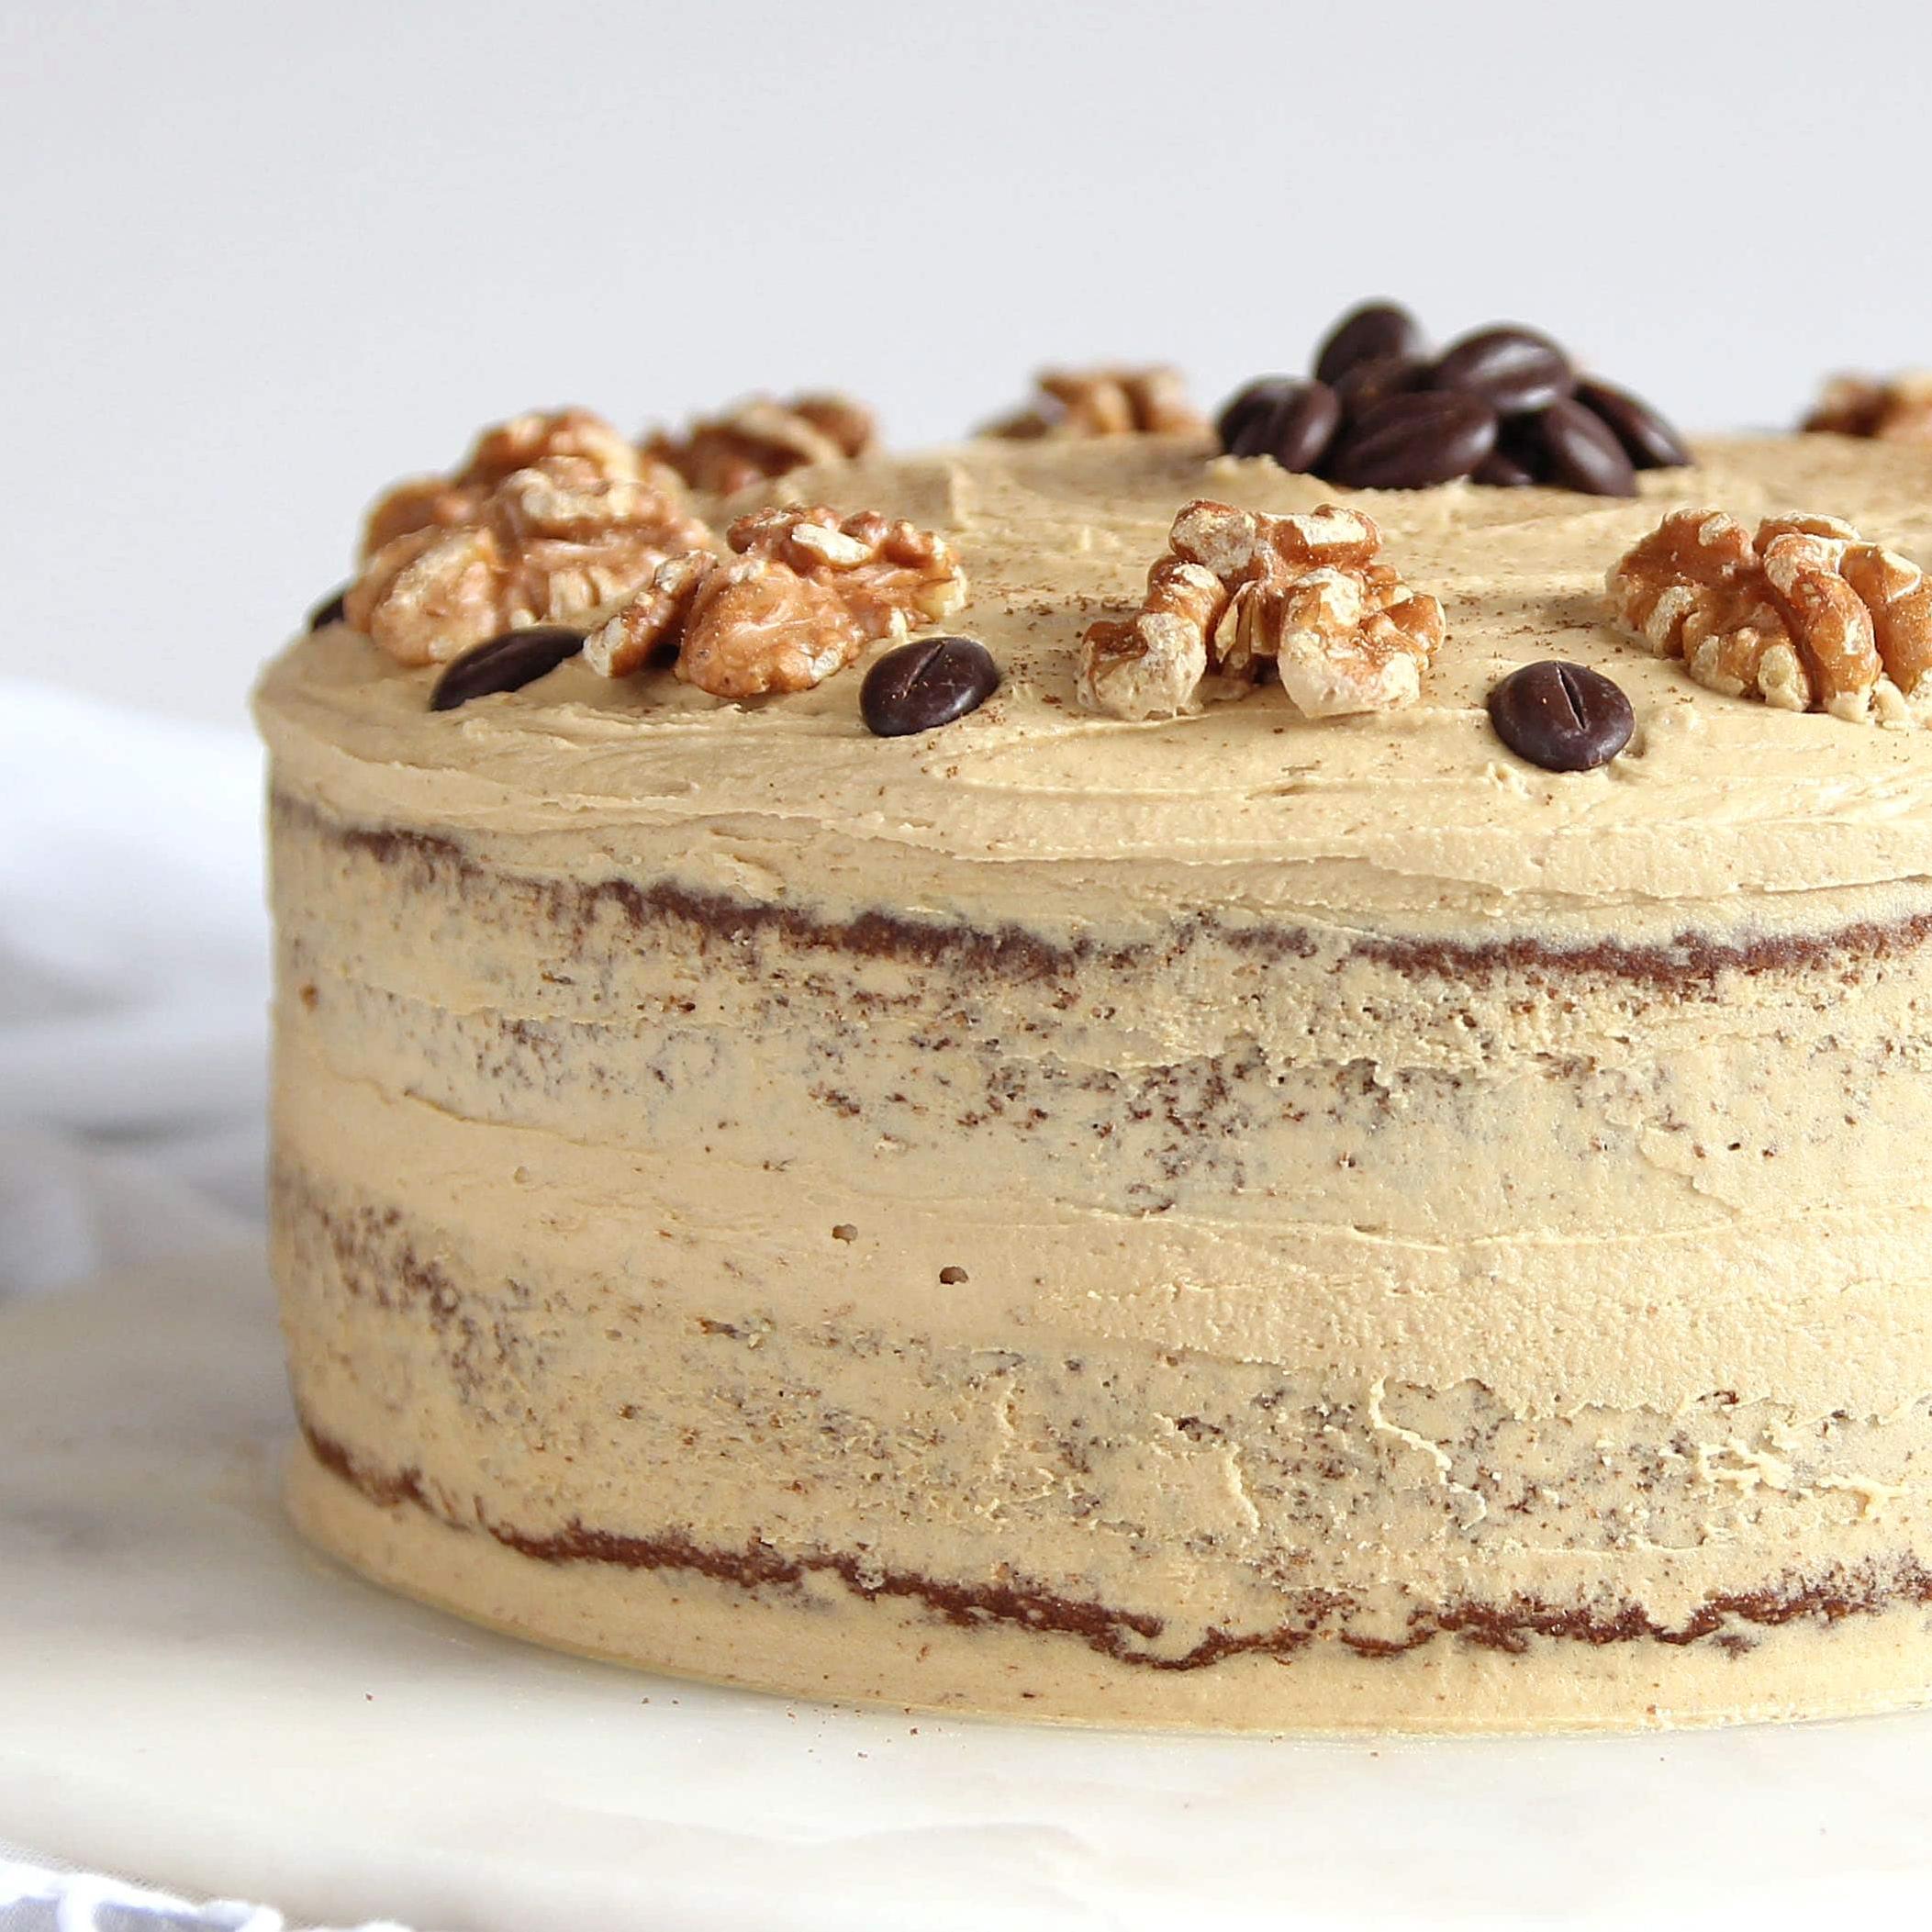  A coffee lover's dream come true, made with almonds and walnuts!